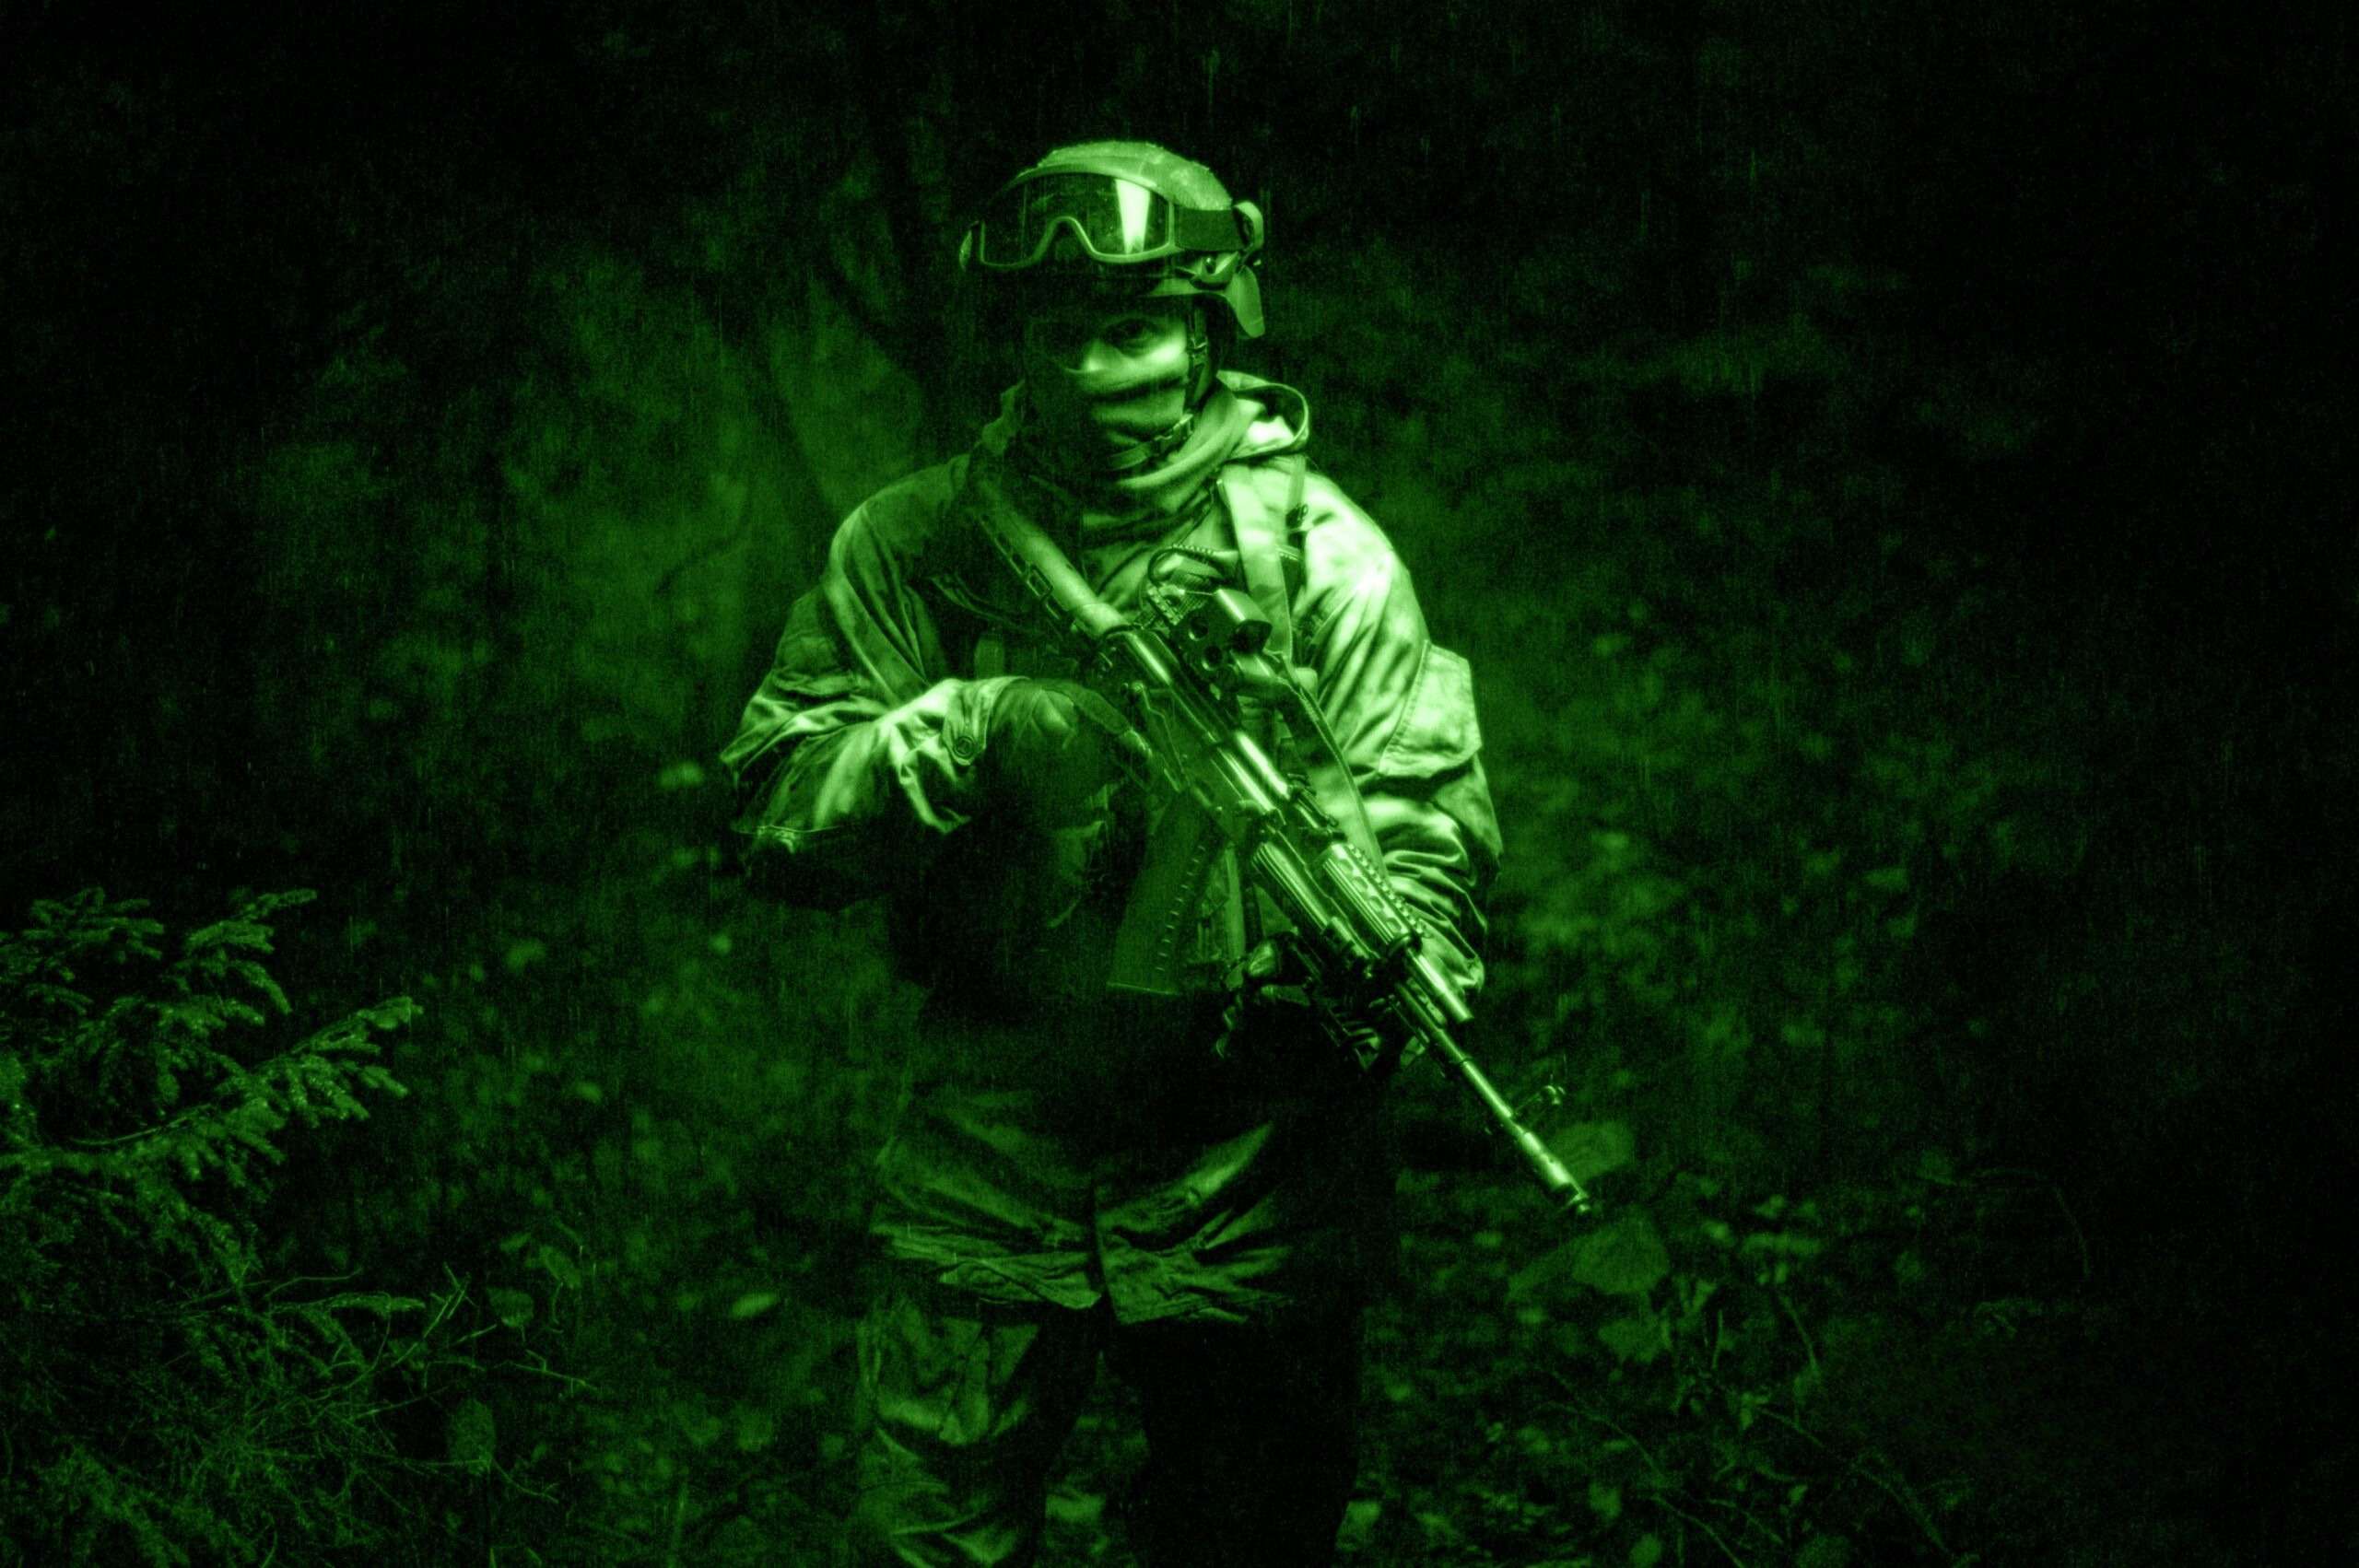 Are night vision scopes legal?